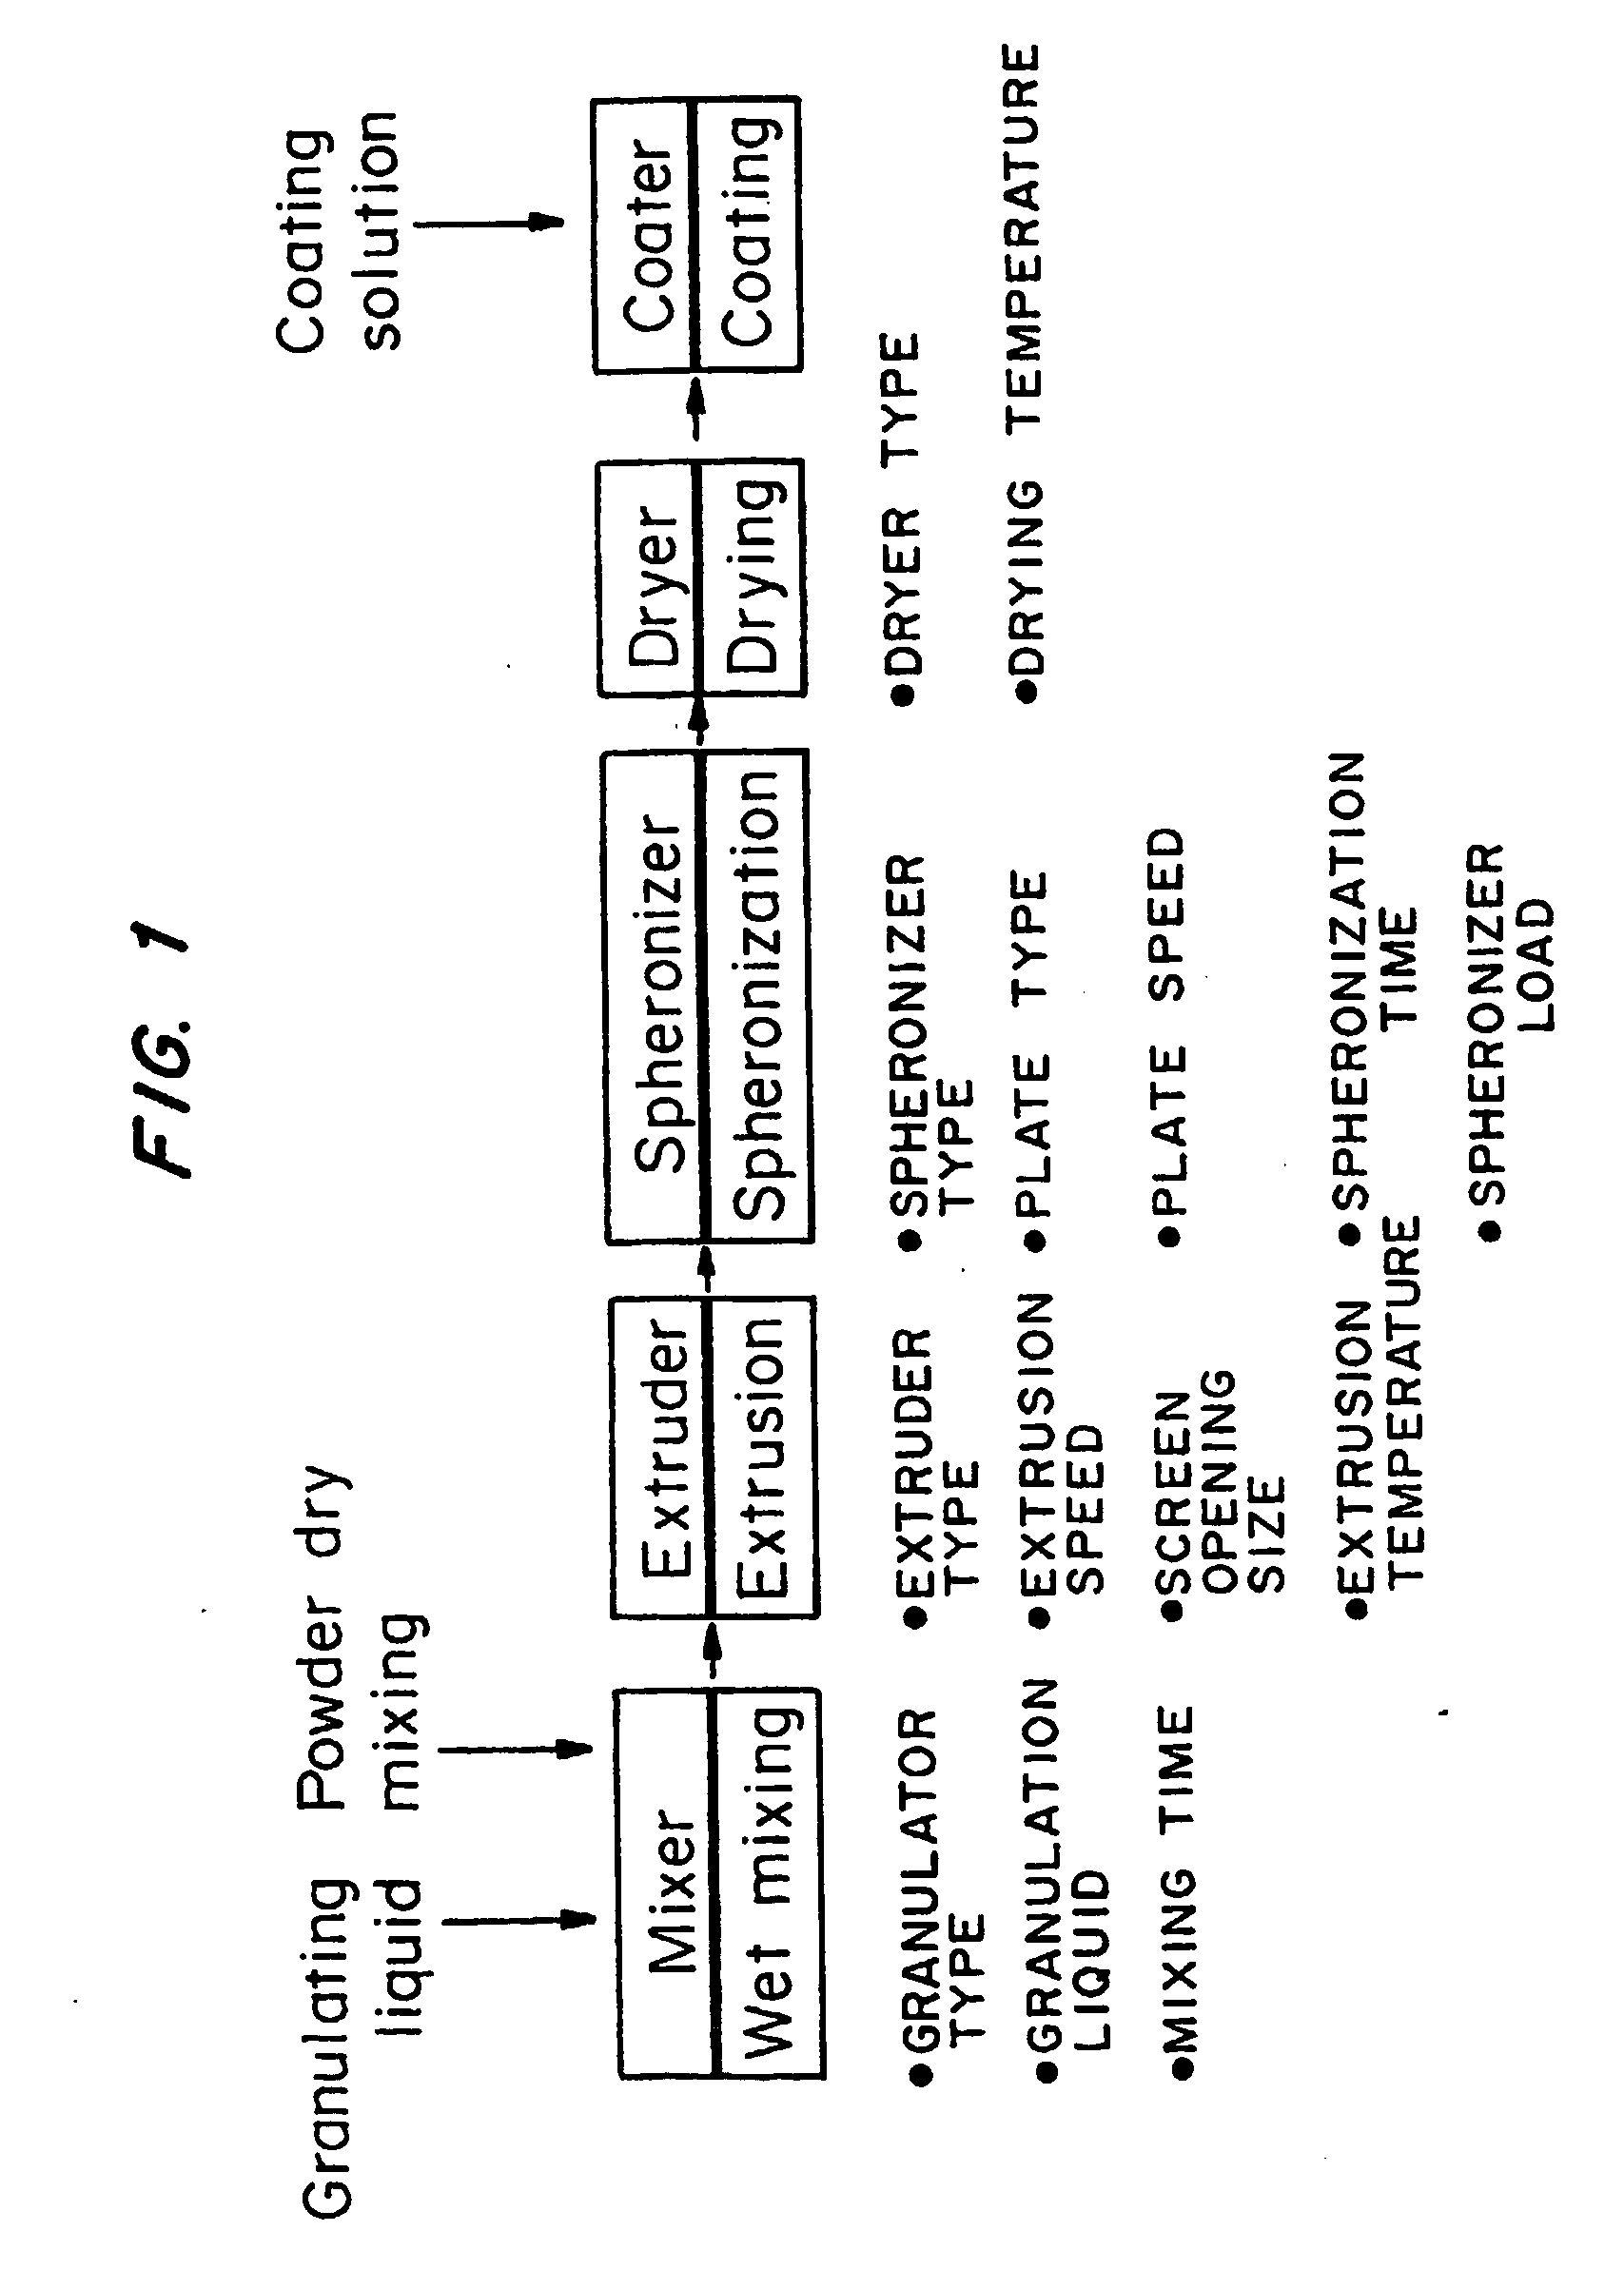 Bioadhesive drug delivery system with enhanced gastric retention